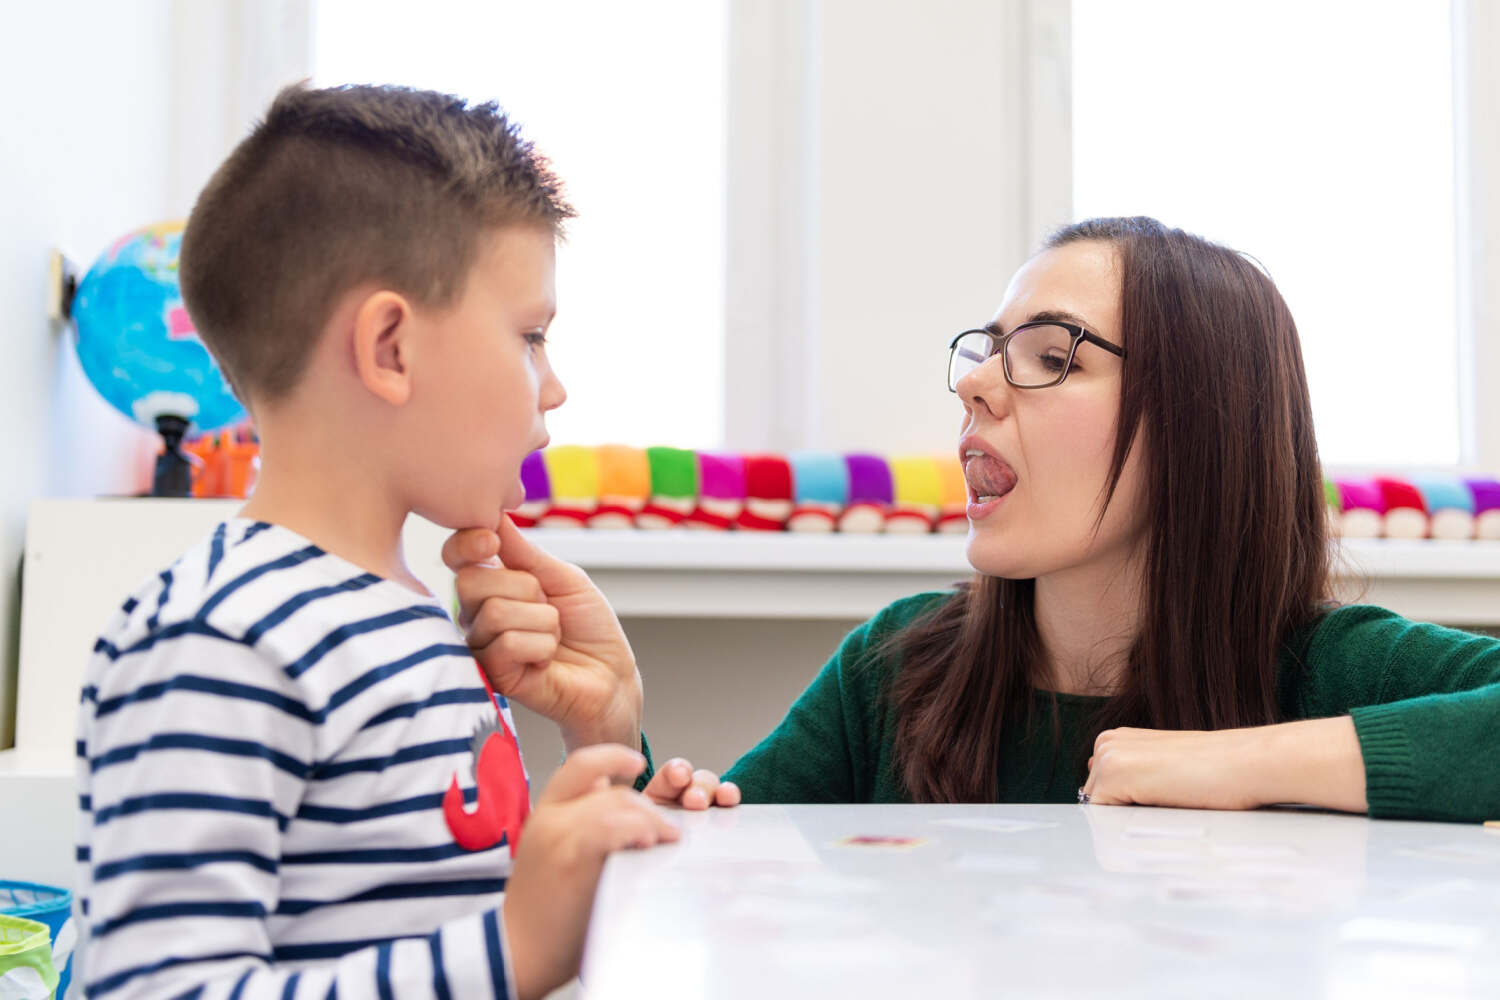 Speech therapy is a treatment of speech disorder